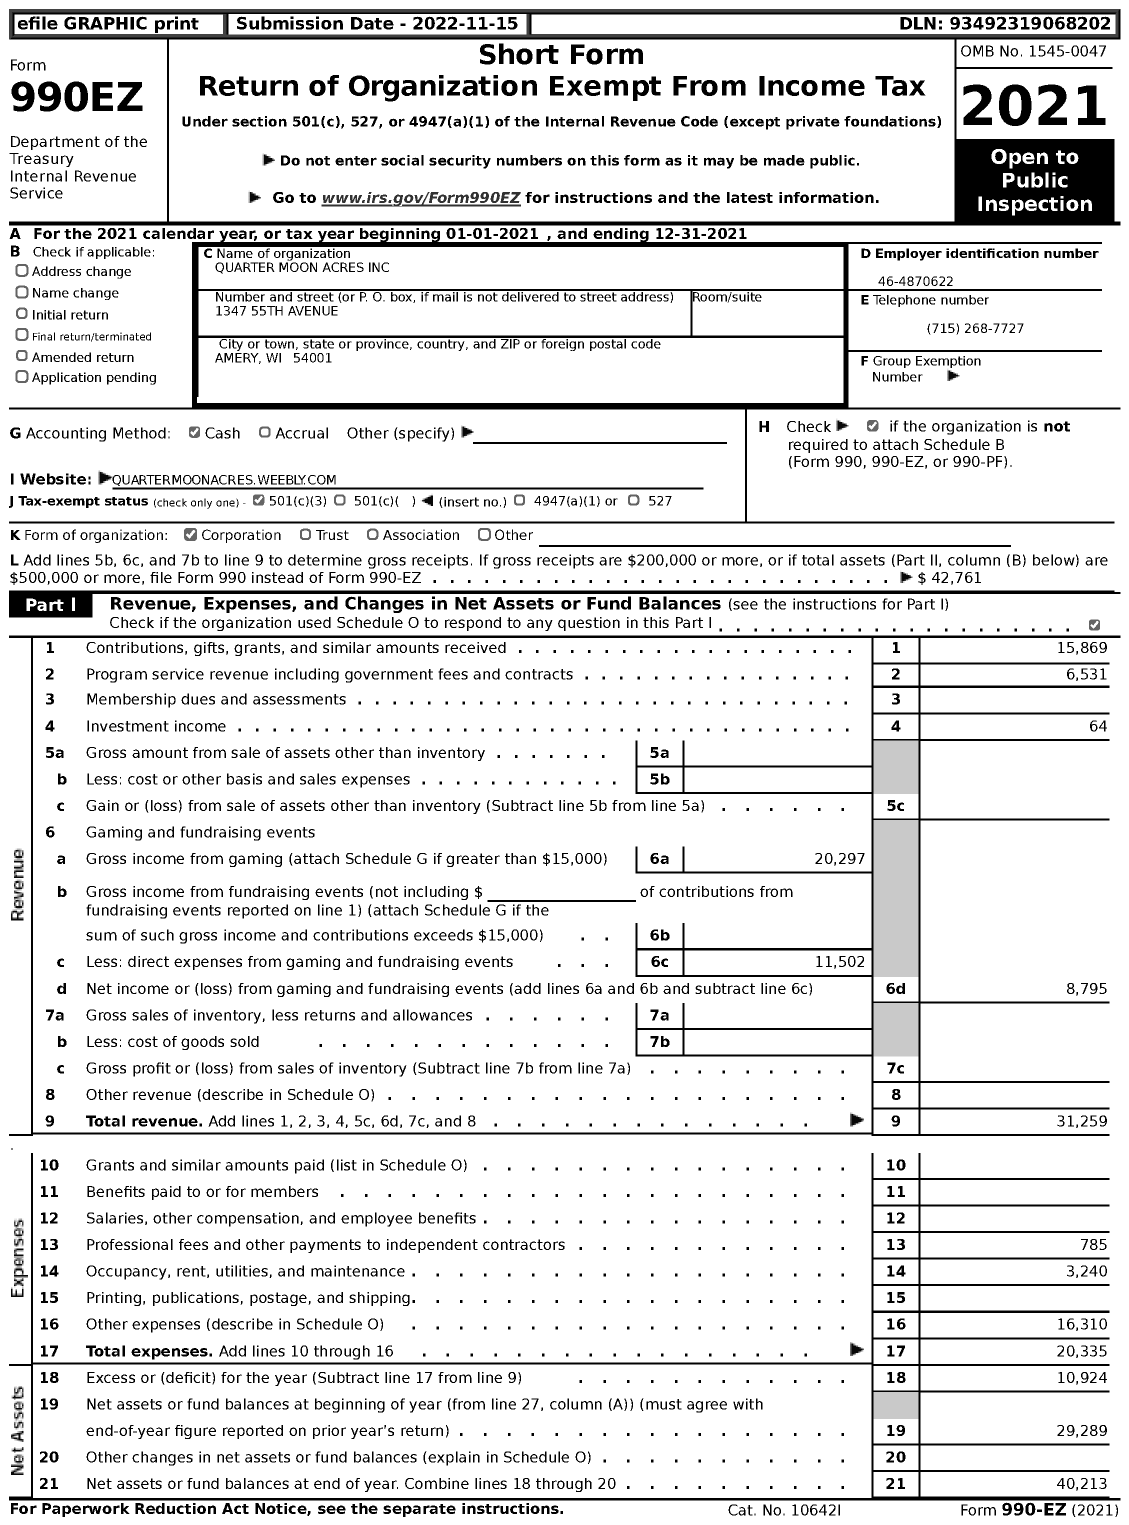 Image of first page of 2021 Form 990EZ for Quarter Moon Acres